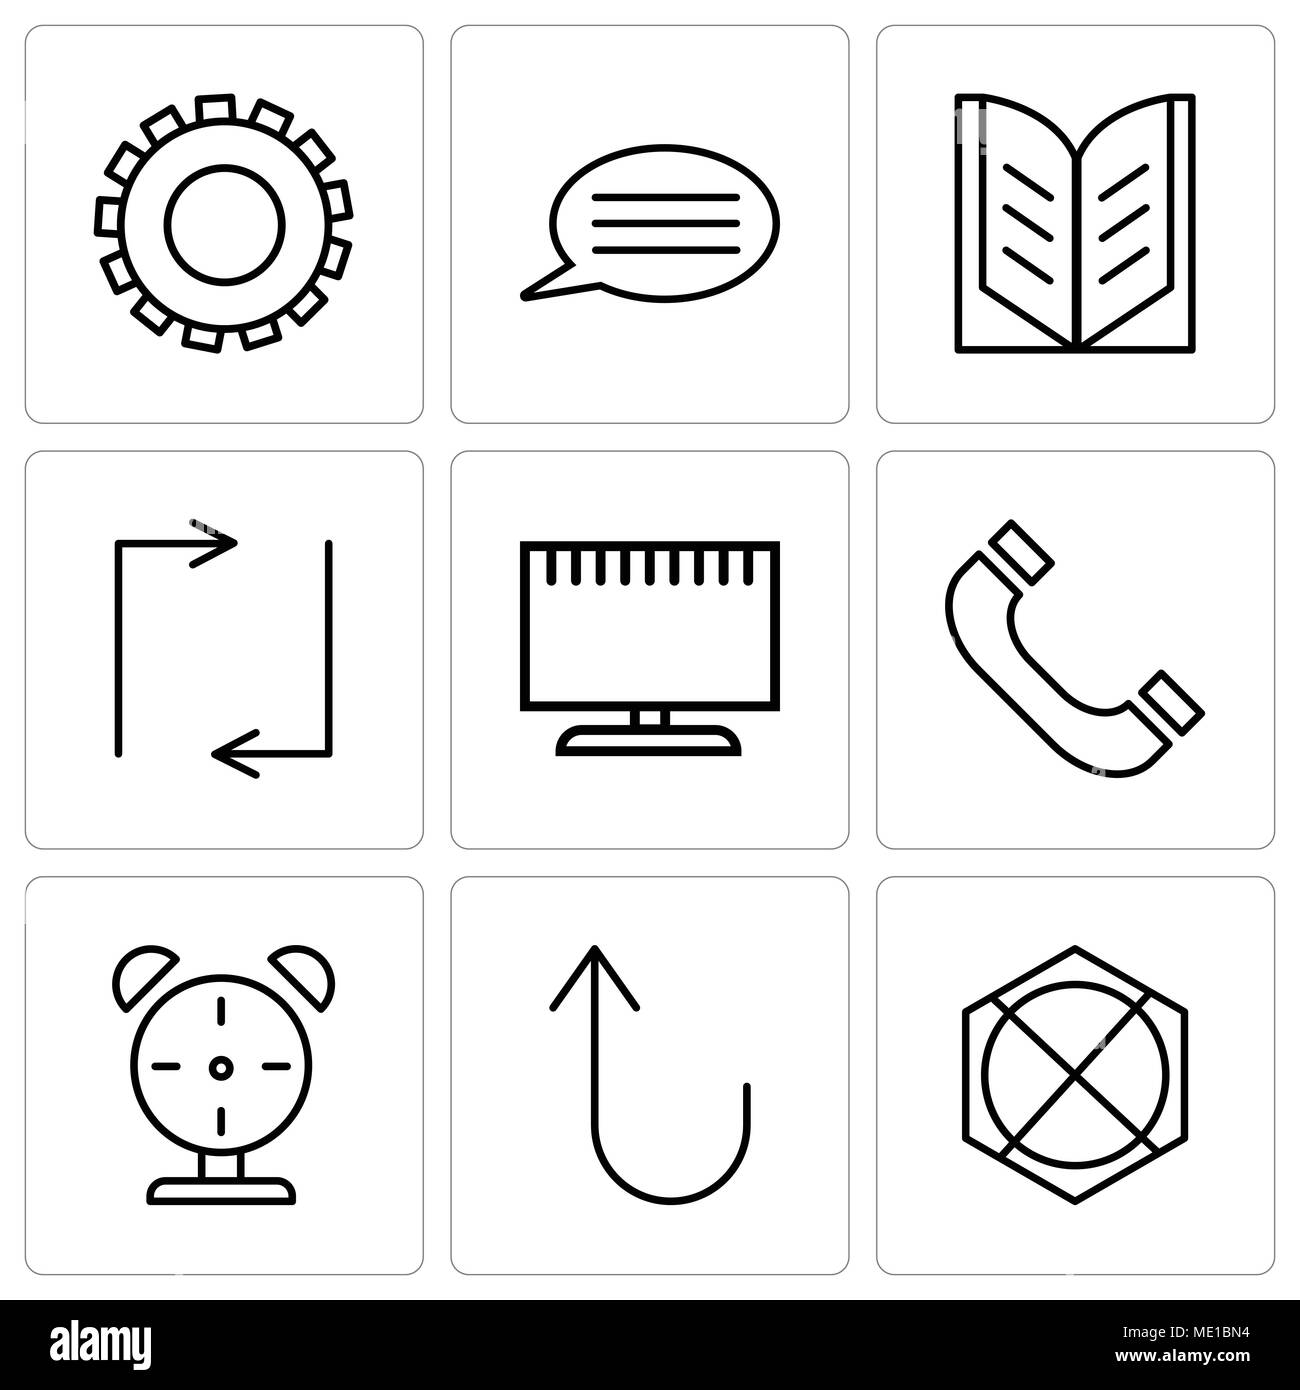 Set Of 9 simple editable icons such as Arrow pointing to up, Cancel button, Alarm clock, Headphones, Television, Update arrows, Open book, Speech bubb Stock Vector